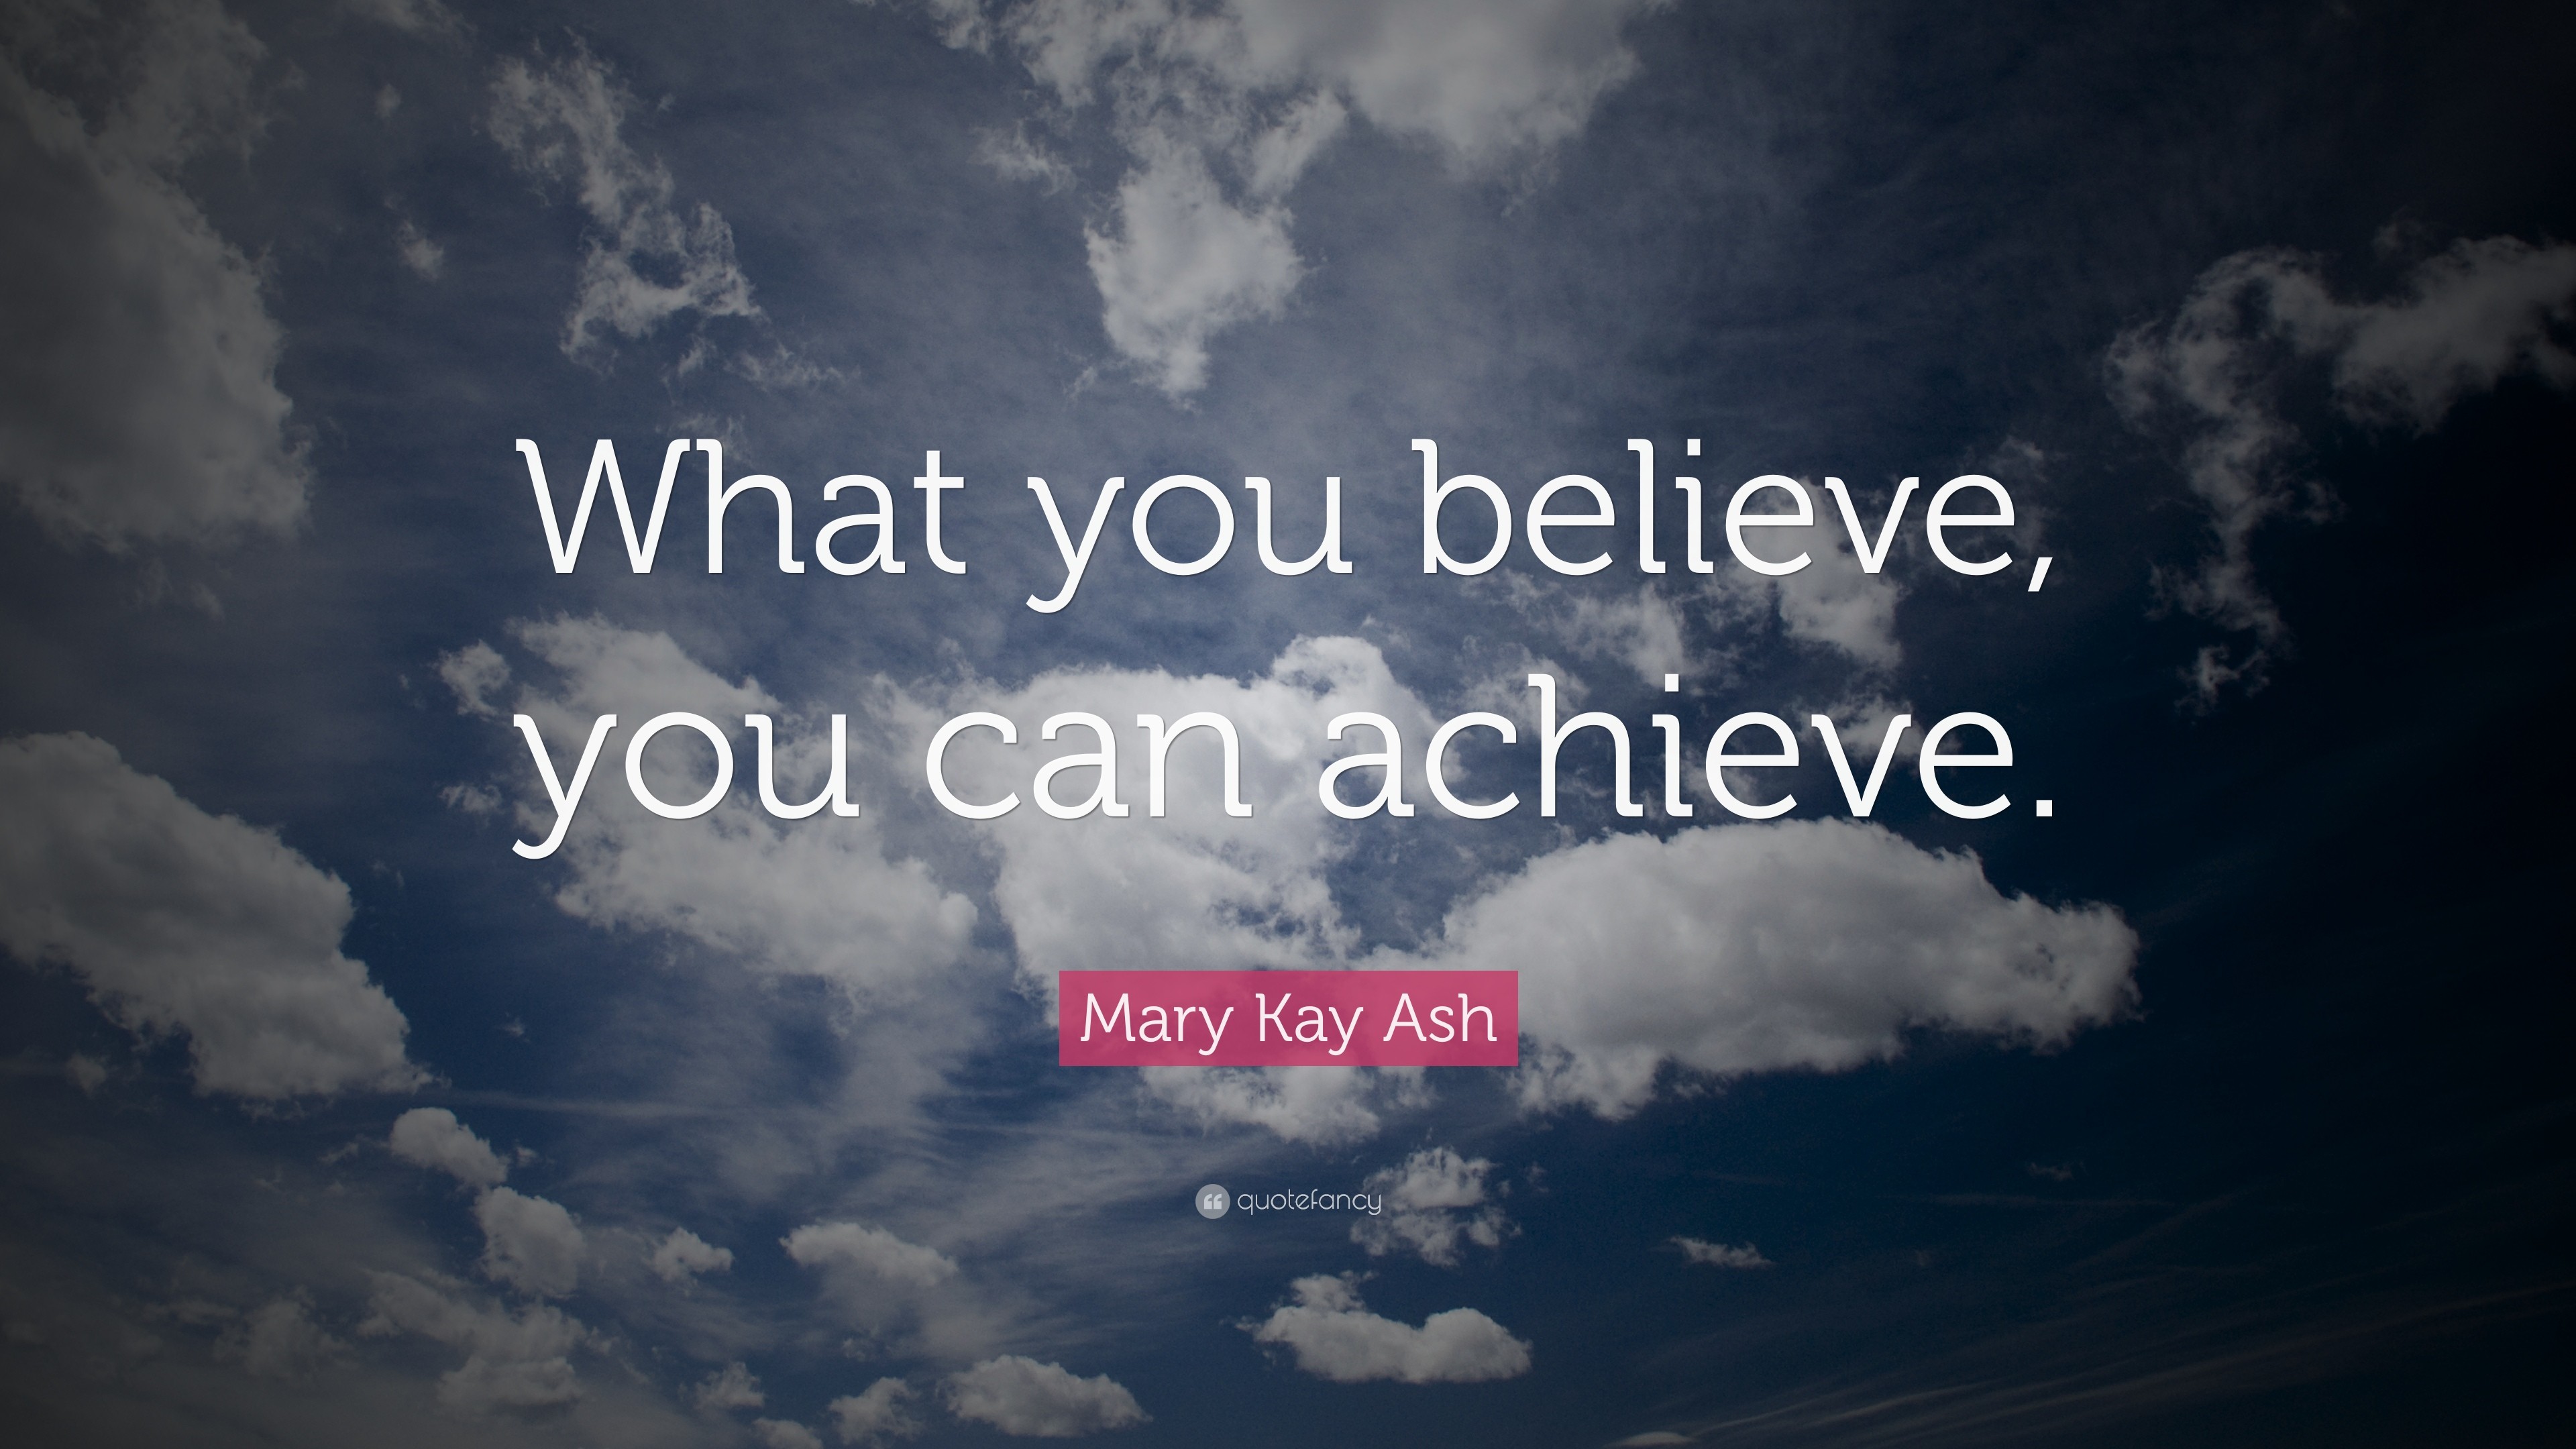 3840x2160 Mary Kay Ash Quote: “What you believe, you can achieve.”